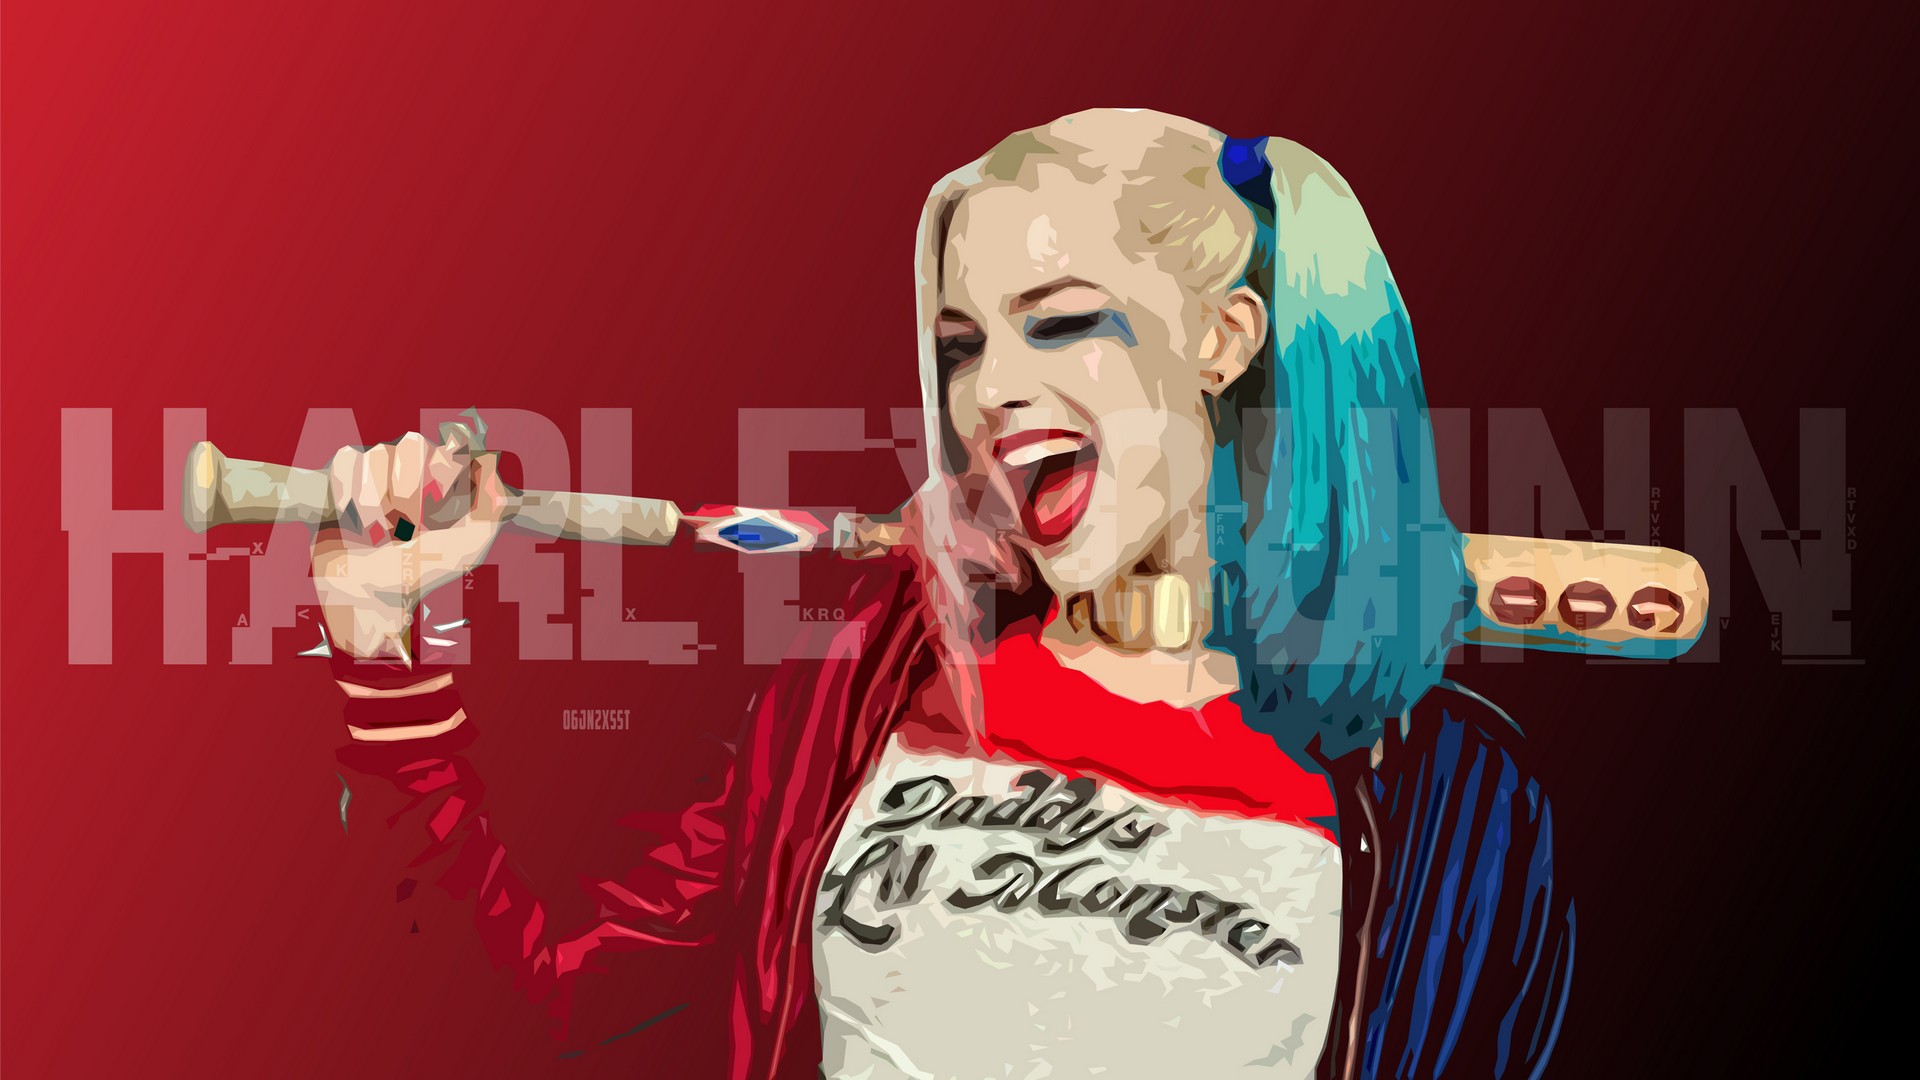 Wallpaper Harley Quinn Desktop with image resolution 1920x1080 pixel. You can use this wallpaper as background for your desktop Computer Screensavers, Android or iPhone smartphones